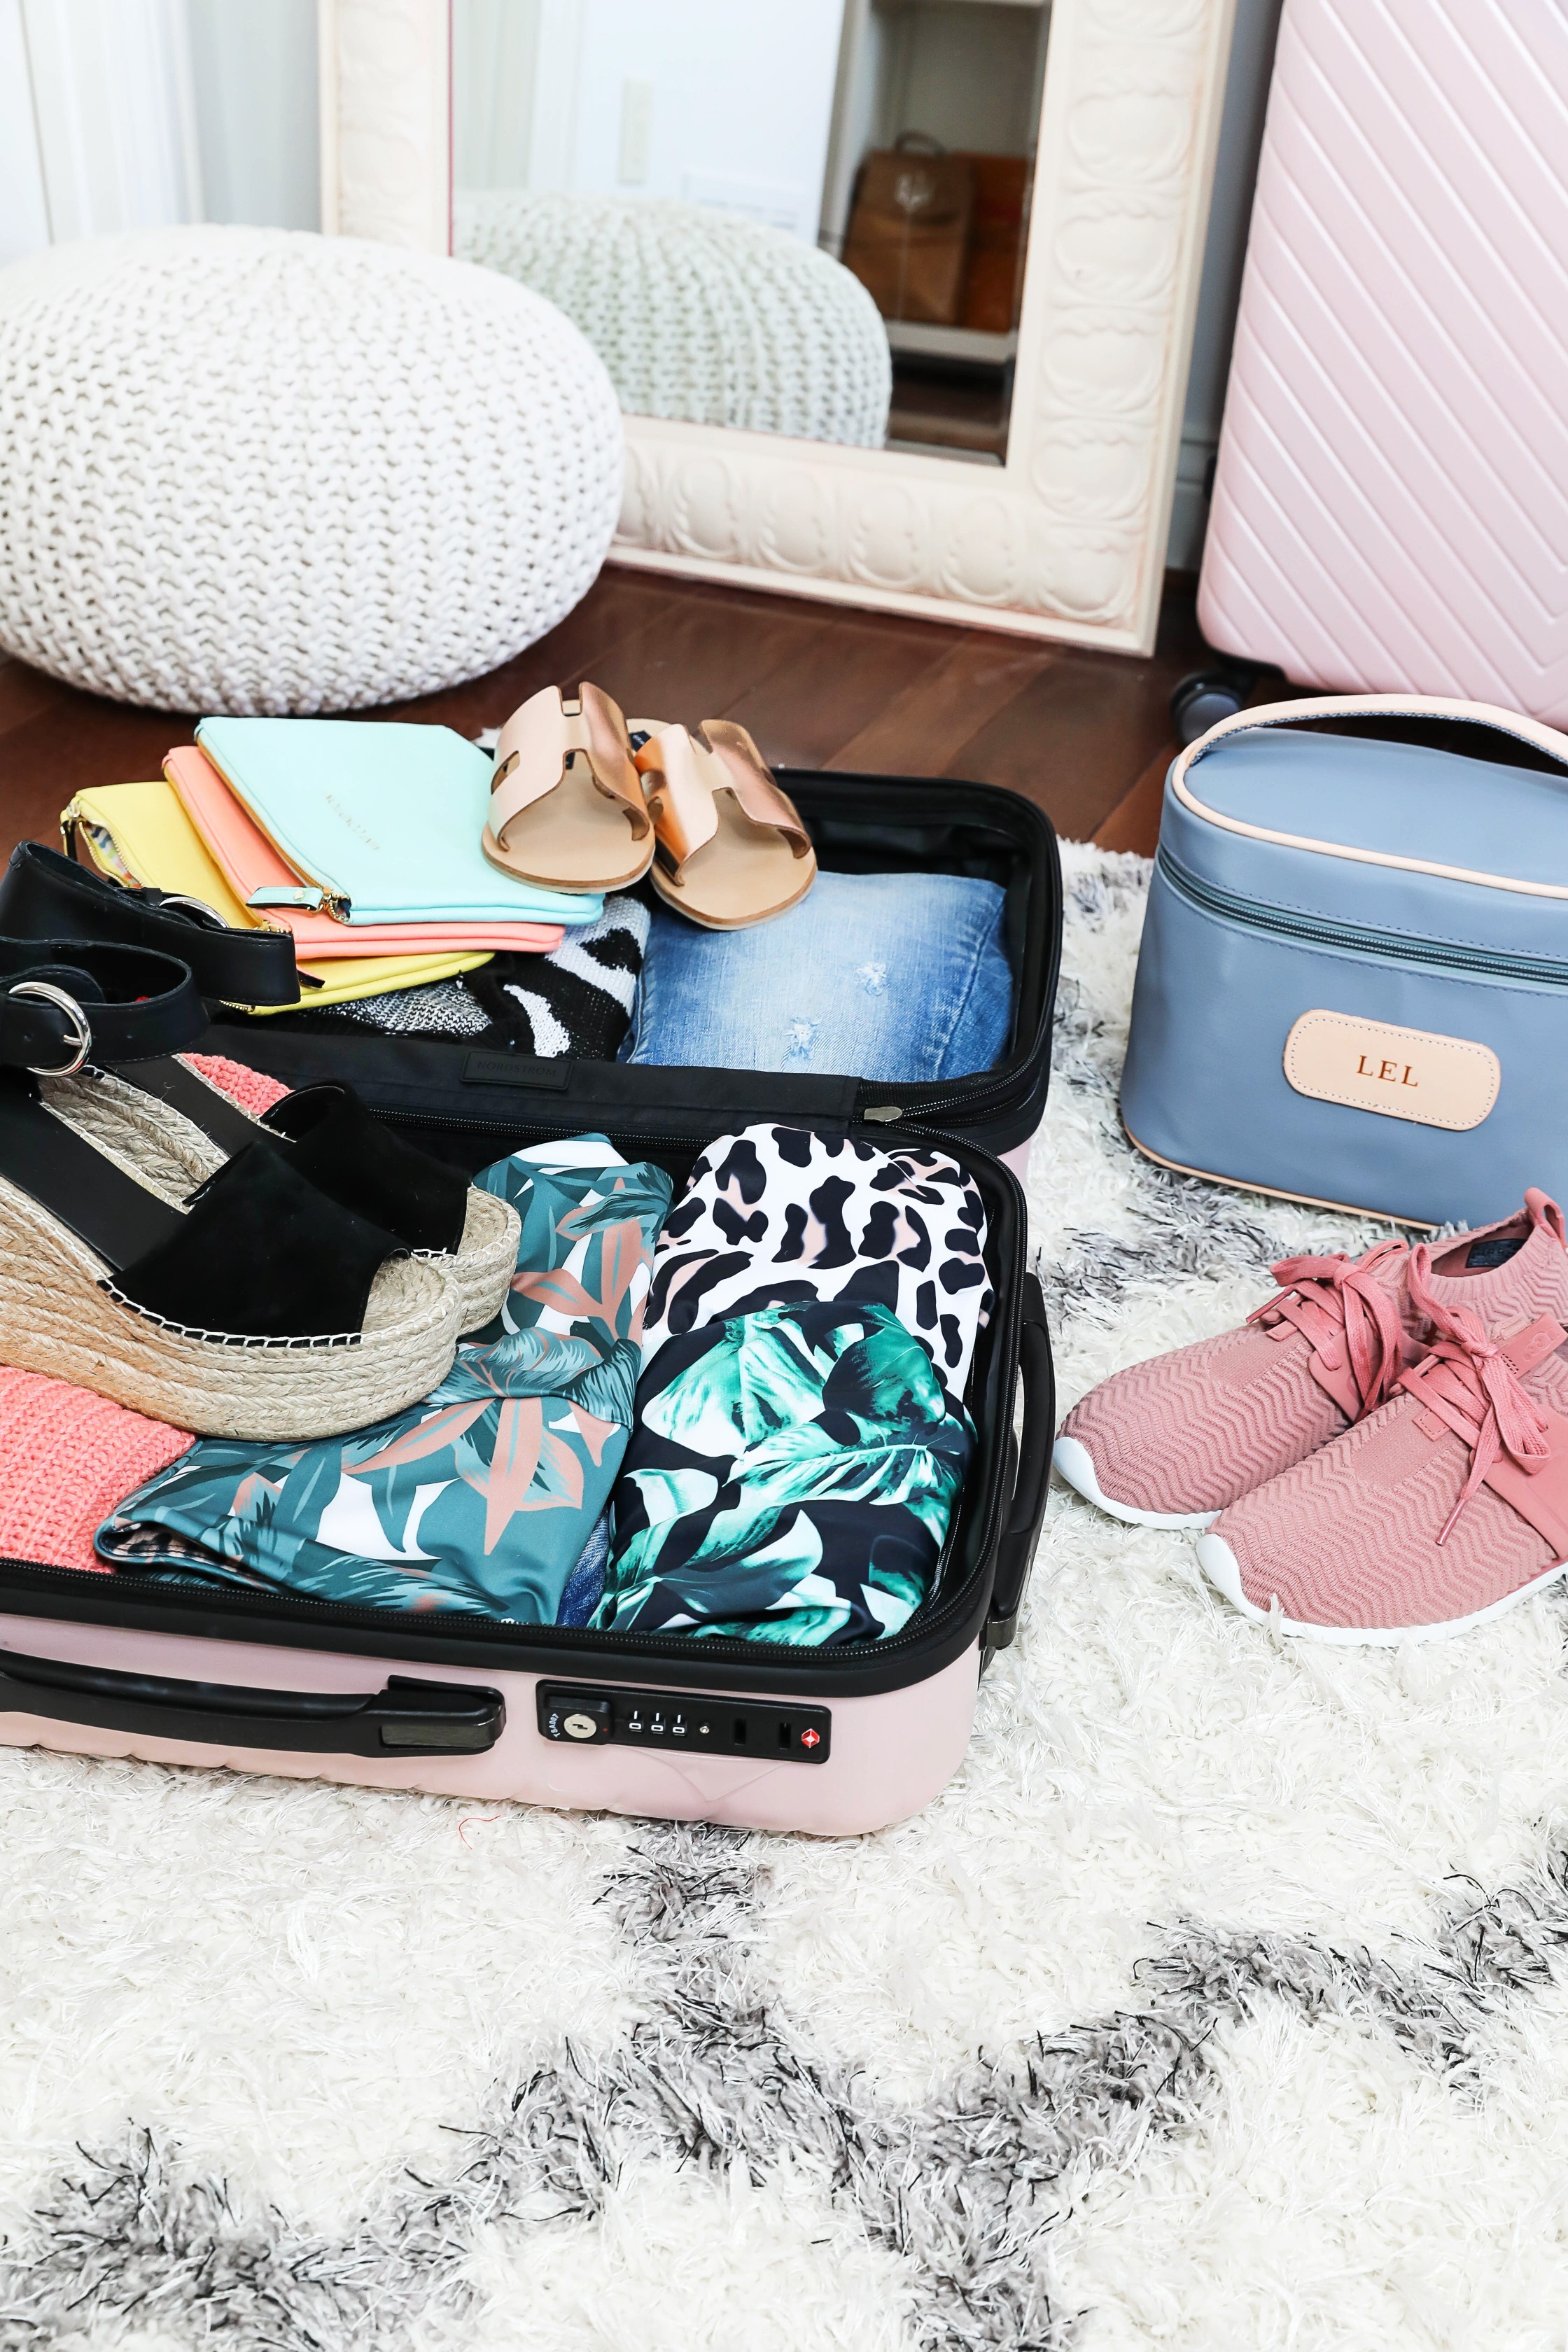 suitcase packing aesthetic  Packing clothes, Suitcase packing, Blue  suitcase